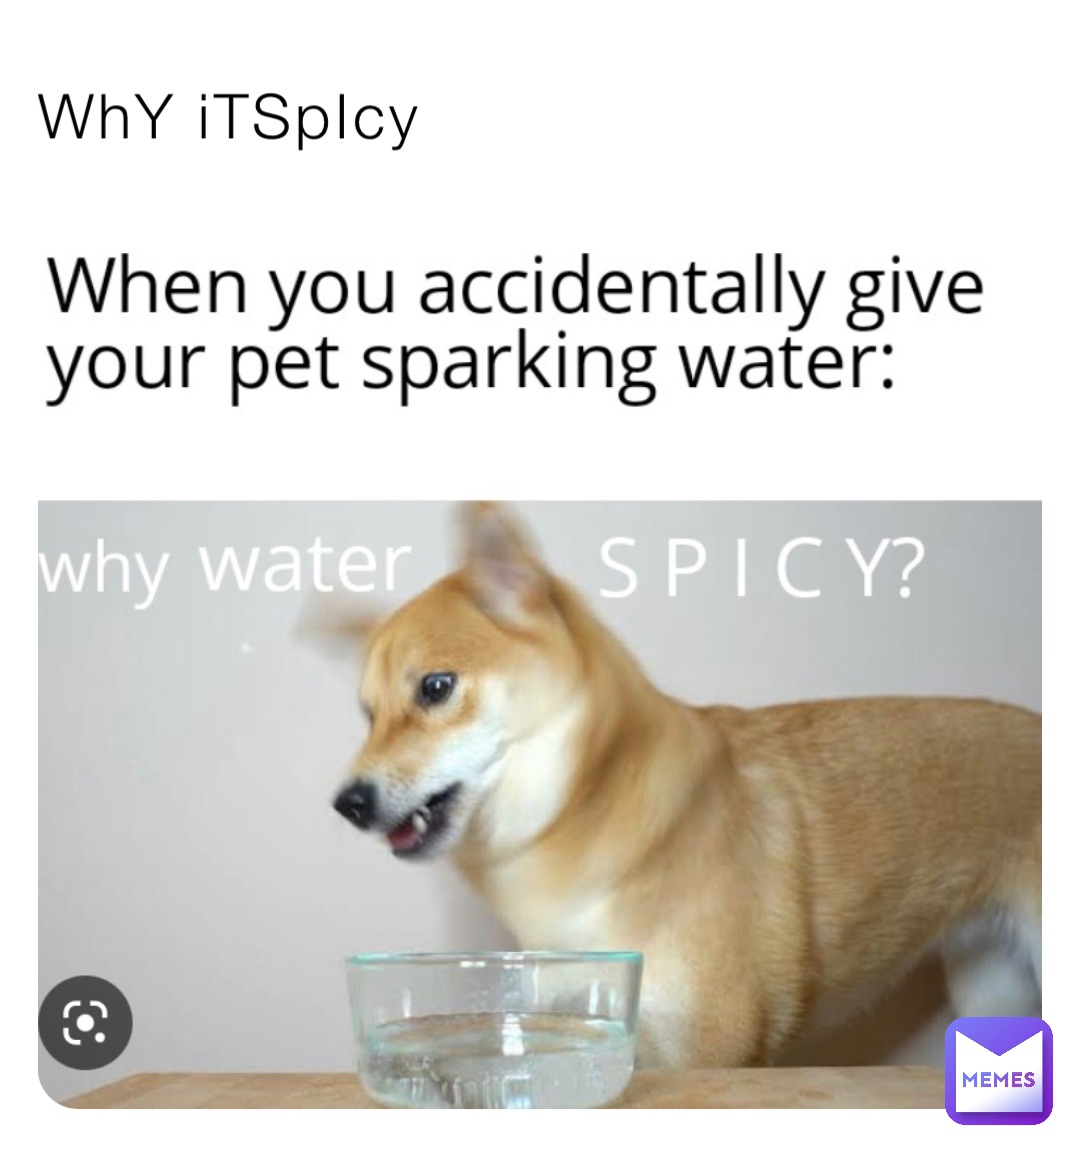 WhY iTSpIcy